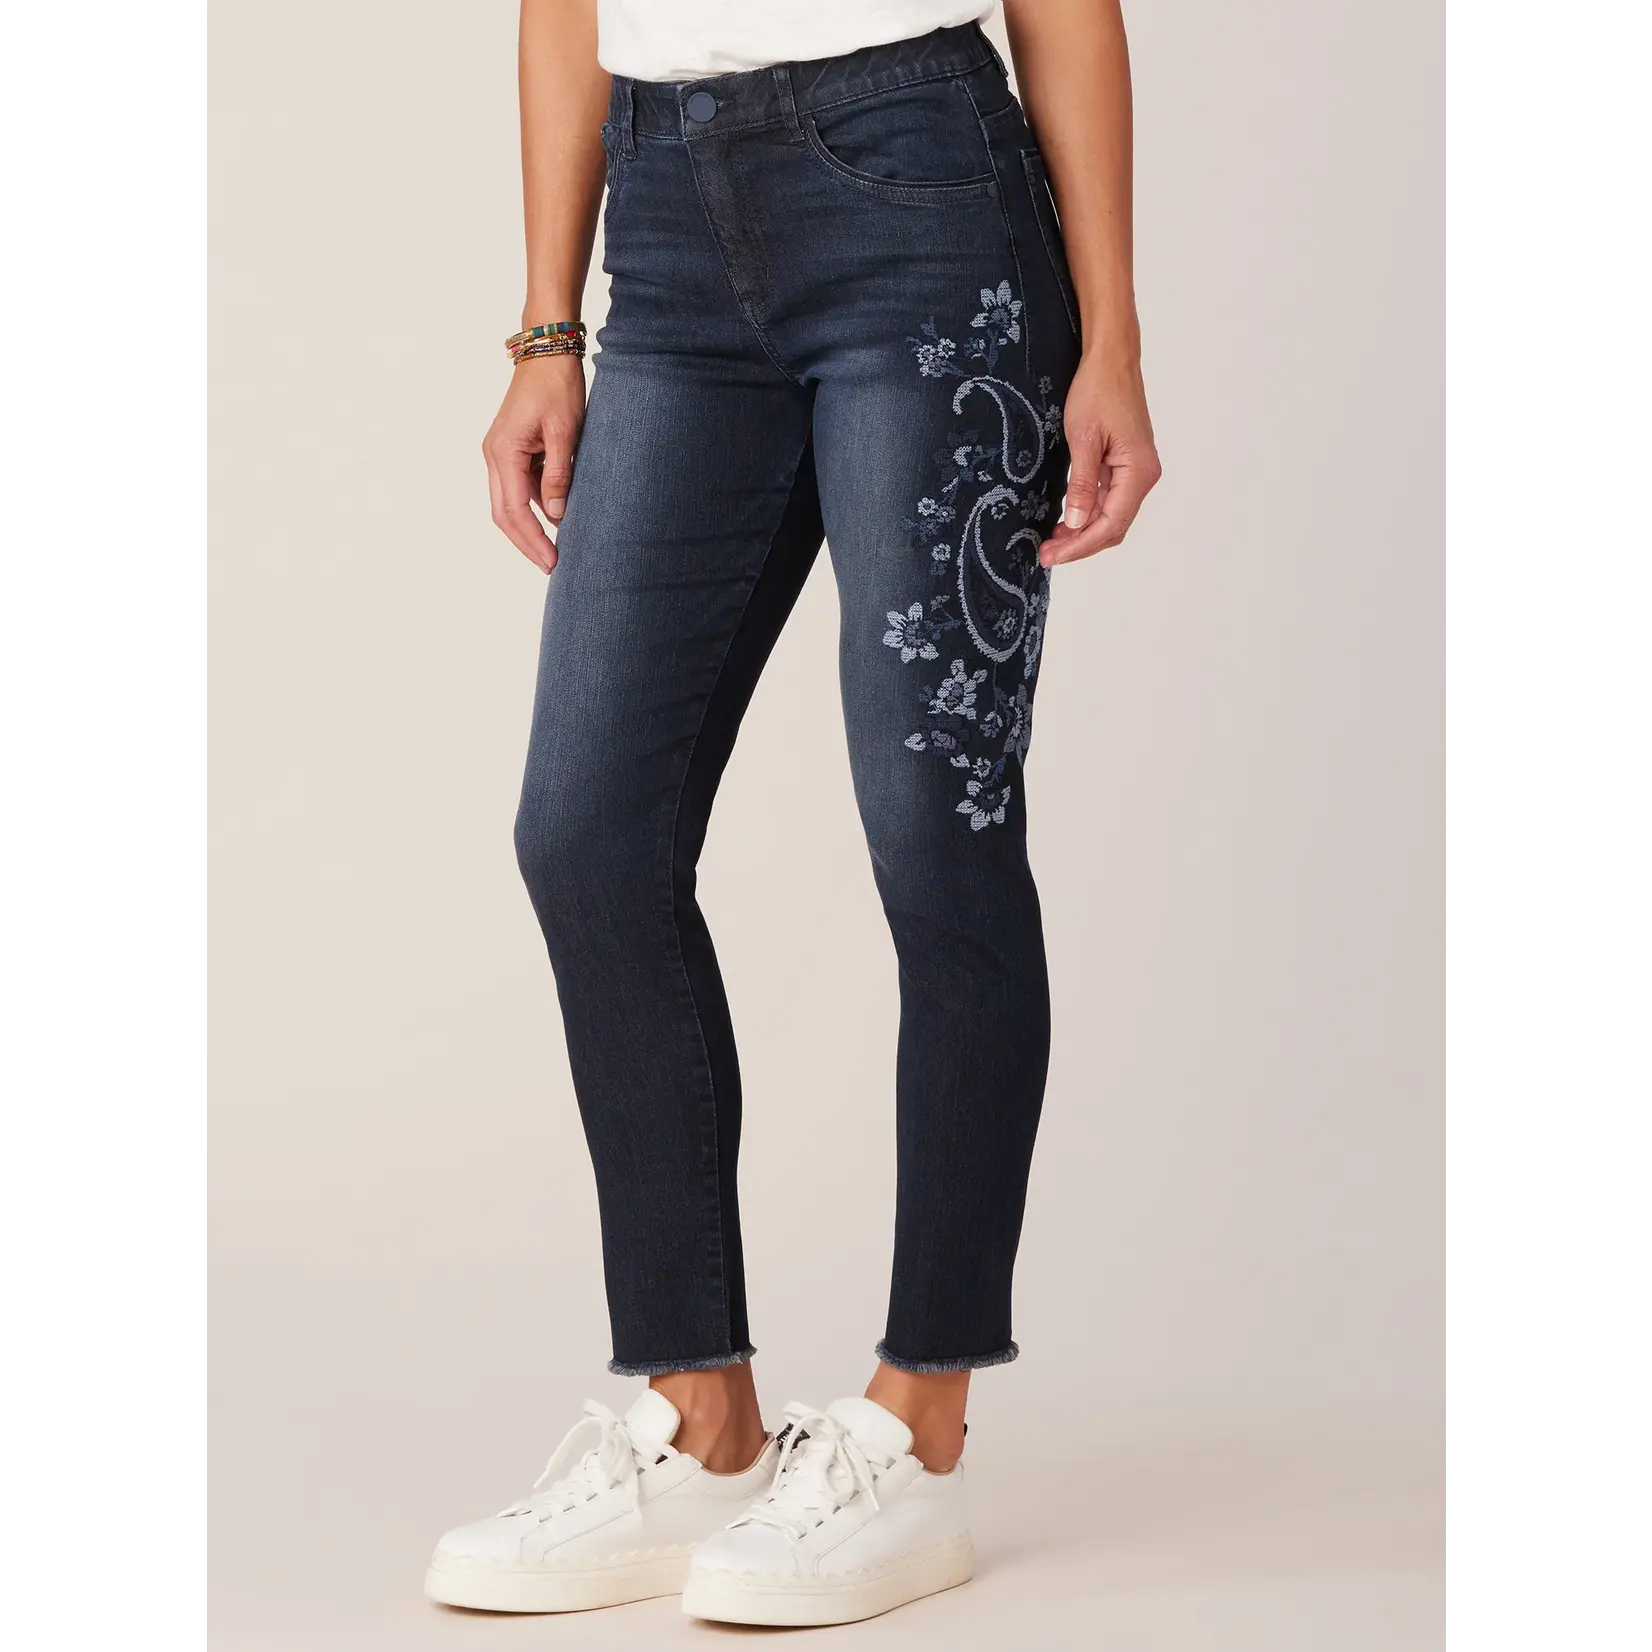 Democracy "Ab"solution Seamless Ankle Skimmer Fray Hem Jeans with Embroidery